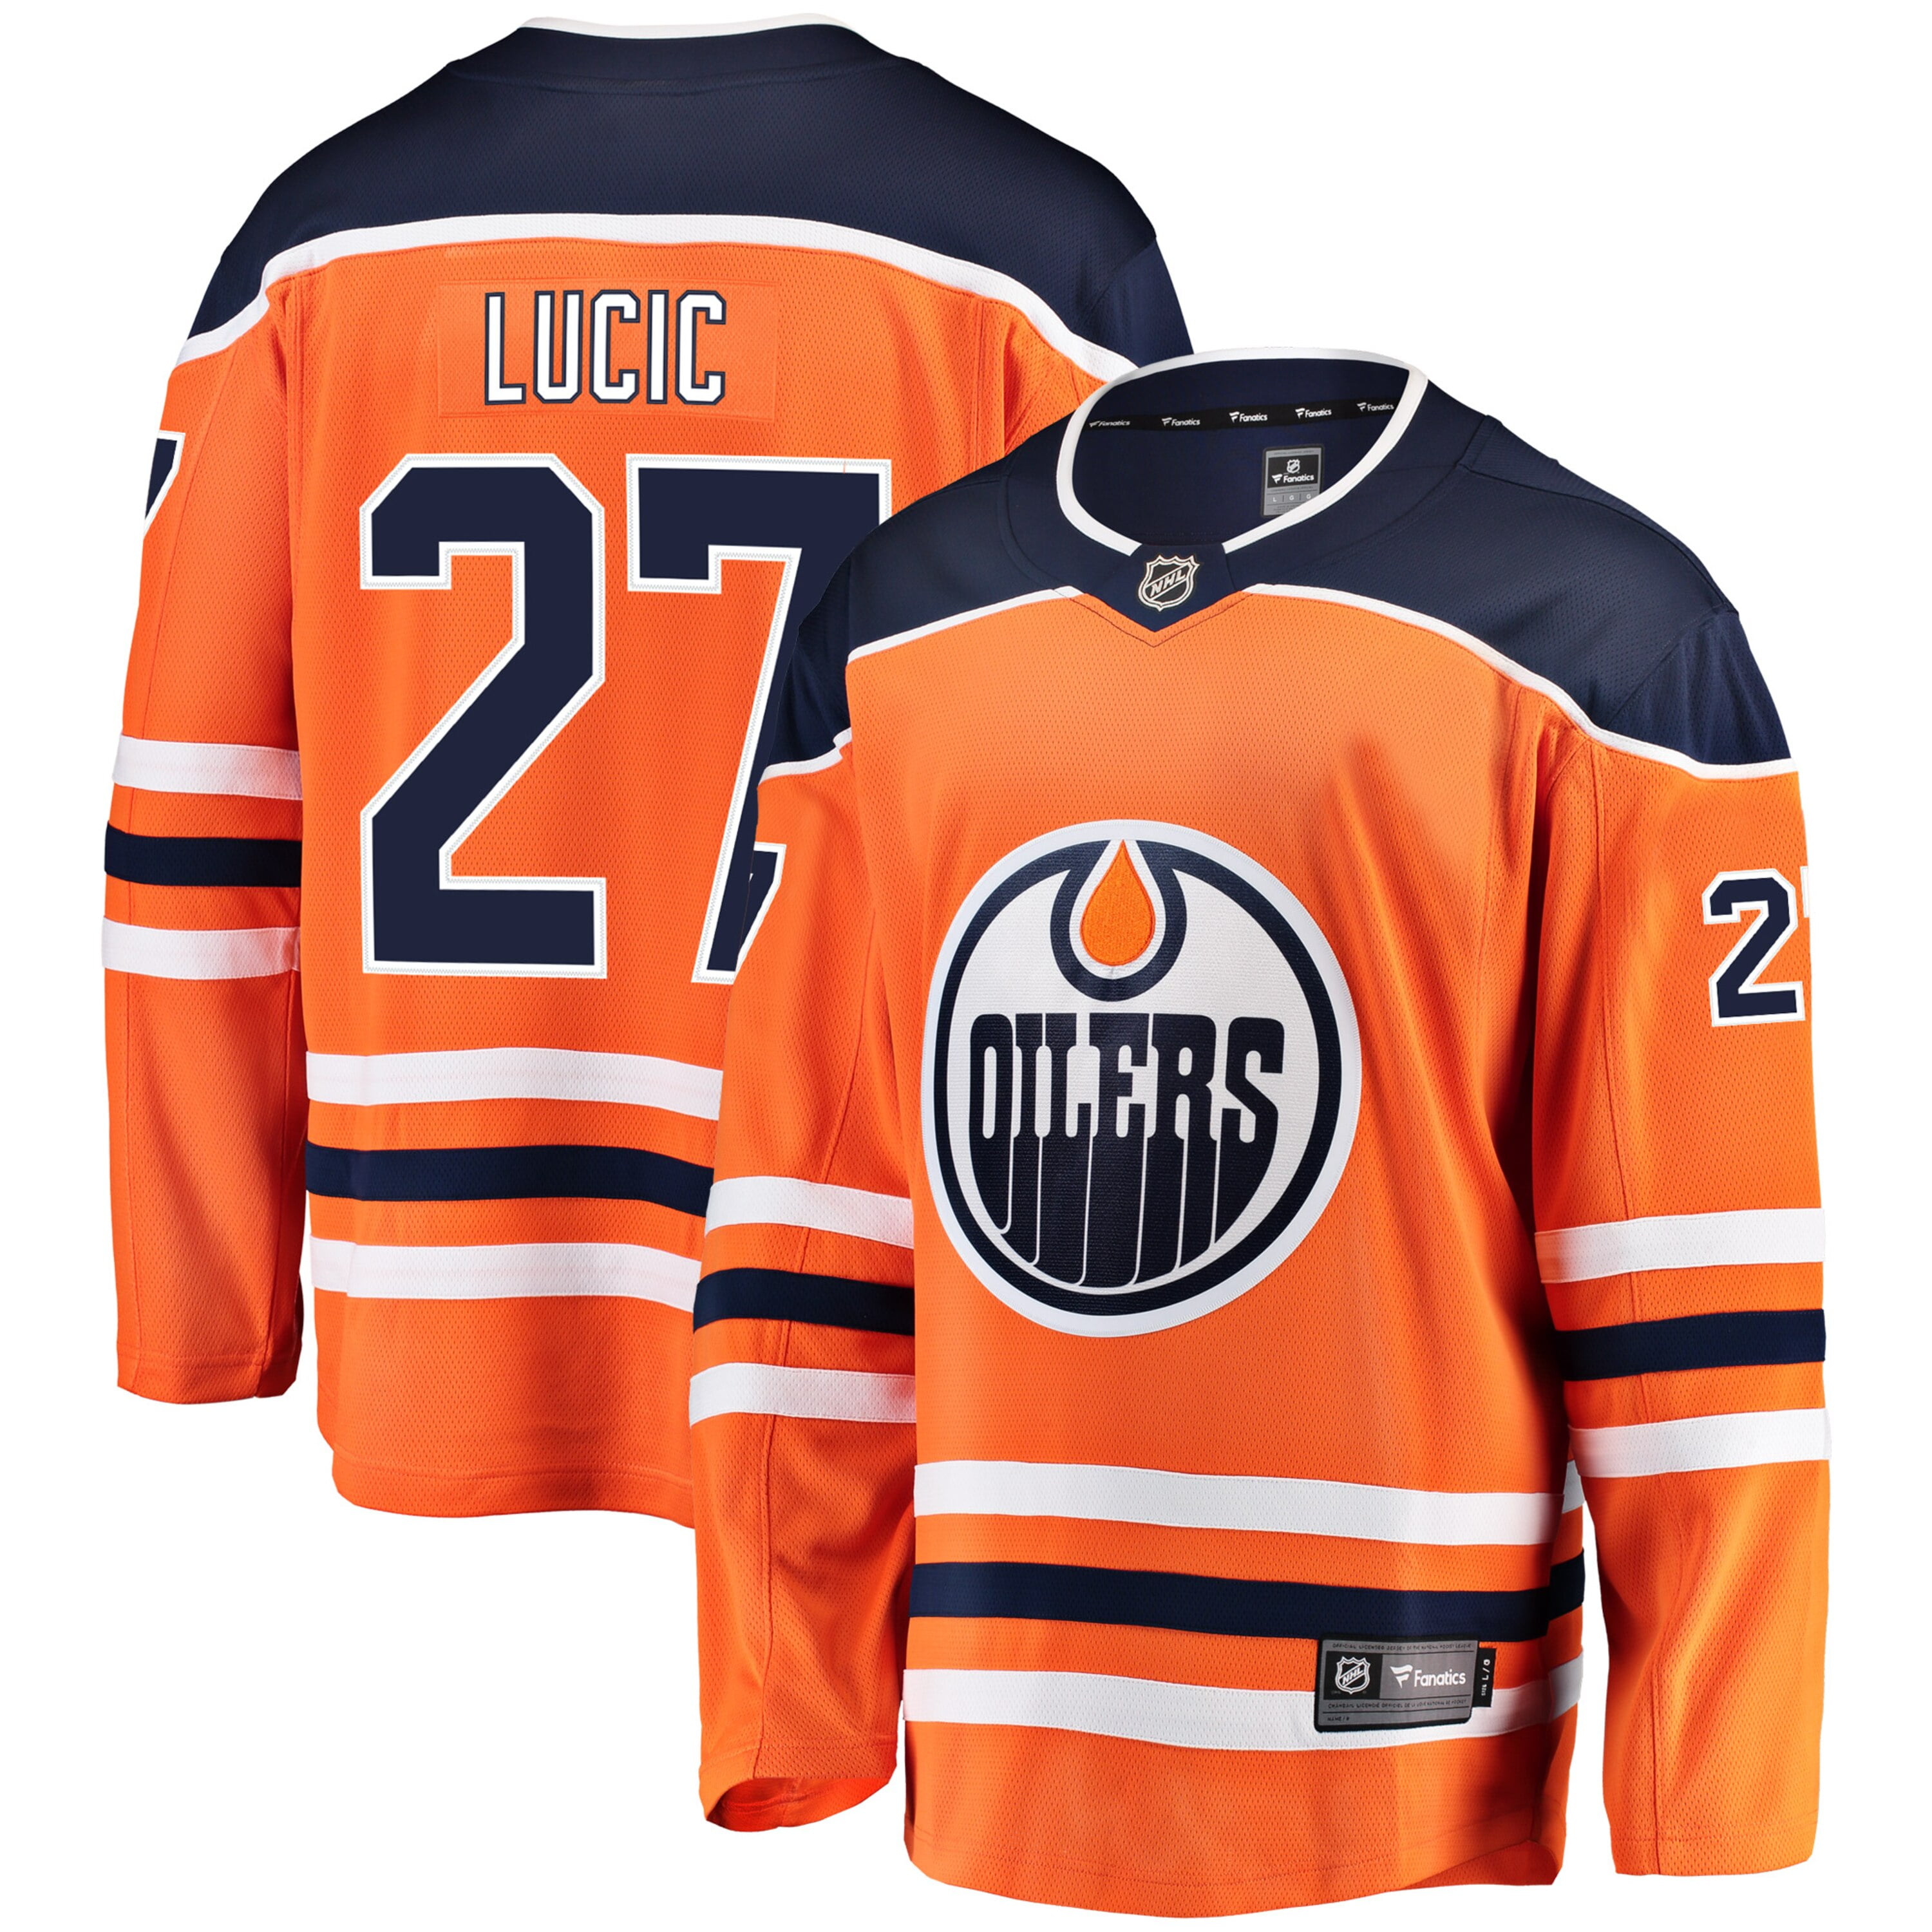 lucic jersey oilers